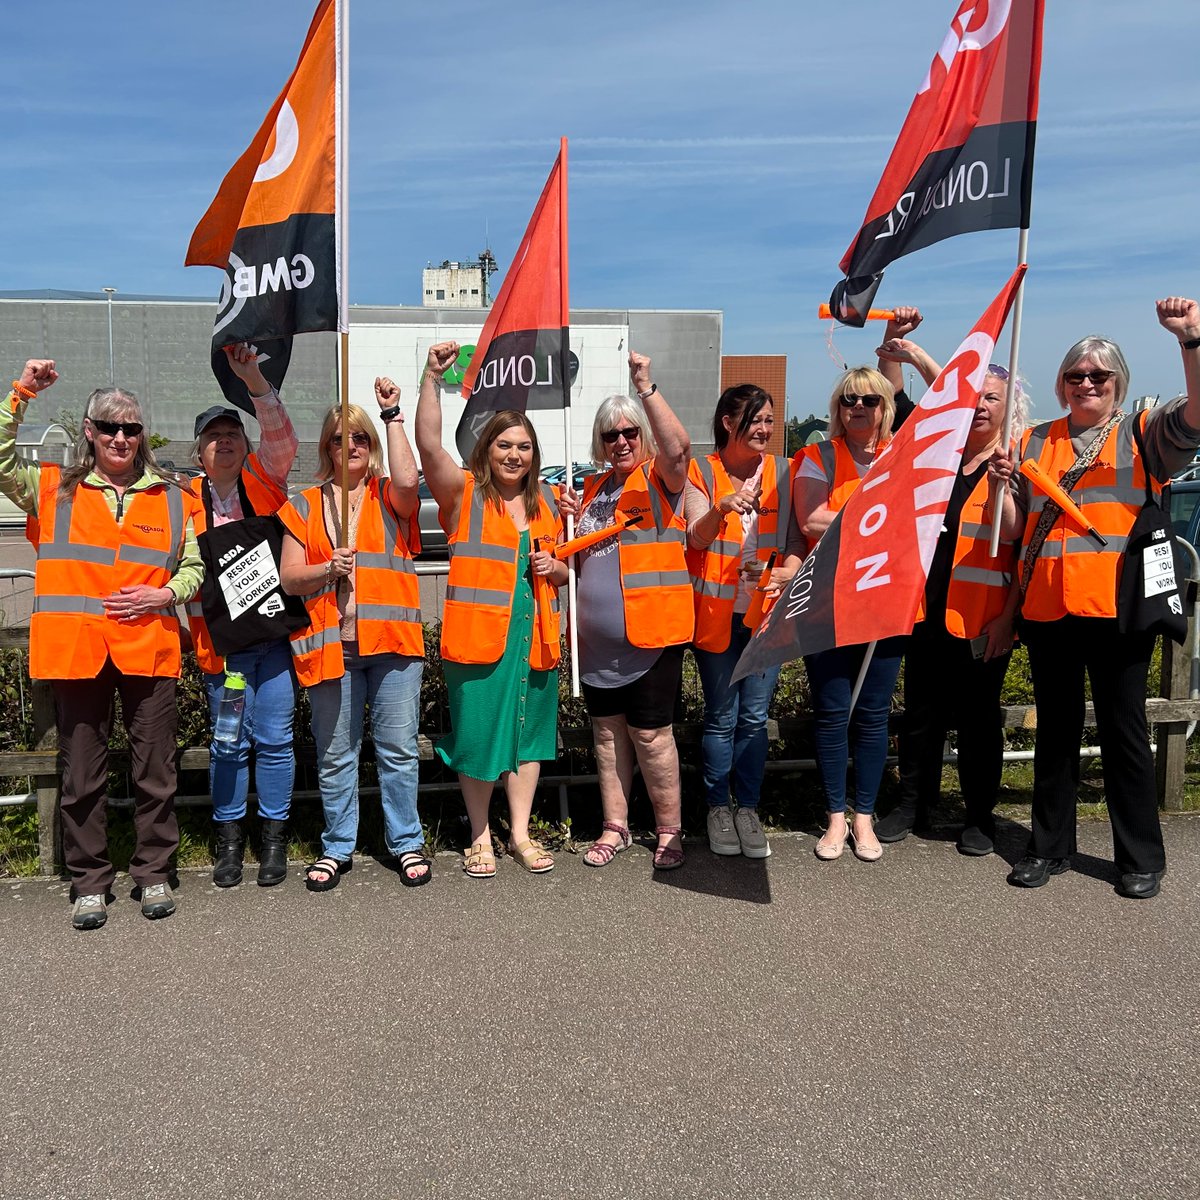 Following the action at Wisbech and Gosport Asda stores, Asda Lowestoft staff took strike action today over cuts to hours, health and safety and equal pay.

These workers are fed up. They're striking for a better, safer Asda.

Solidarity✊